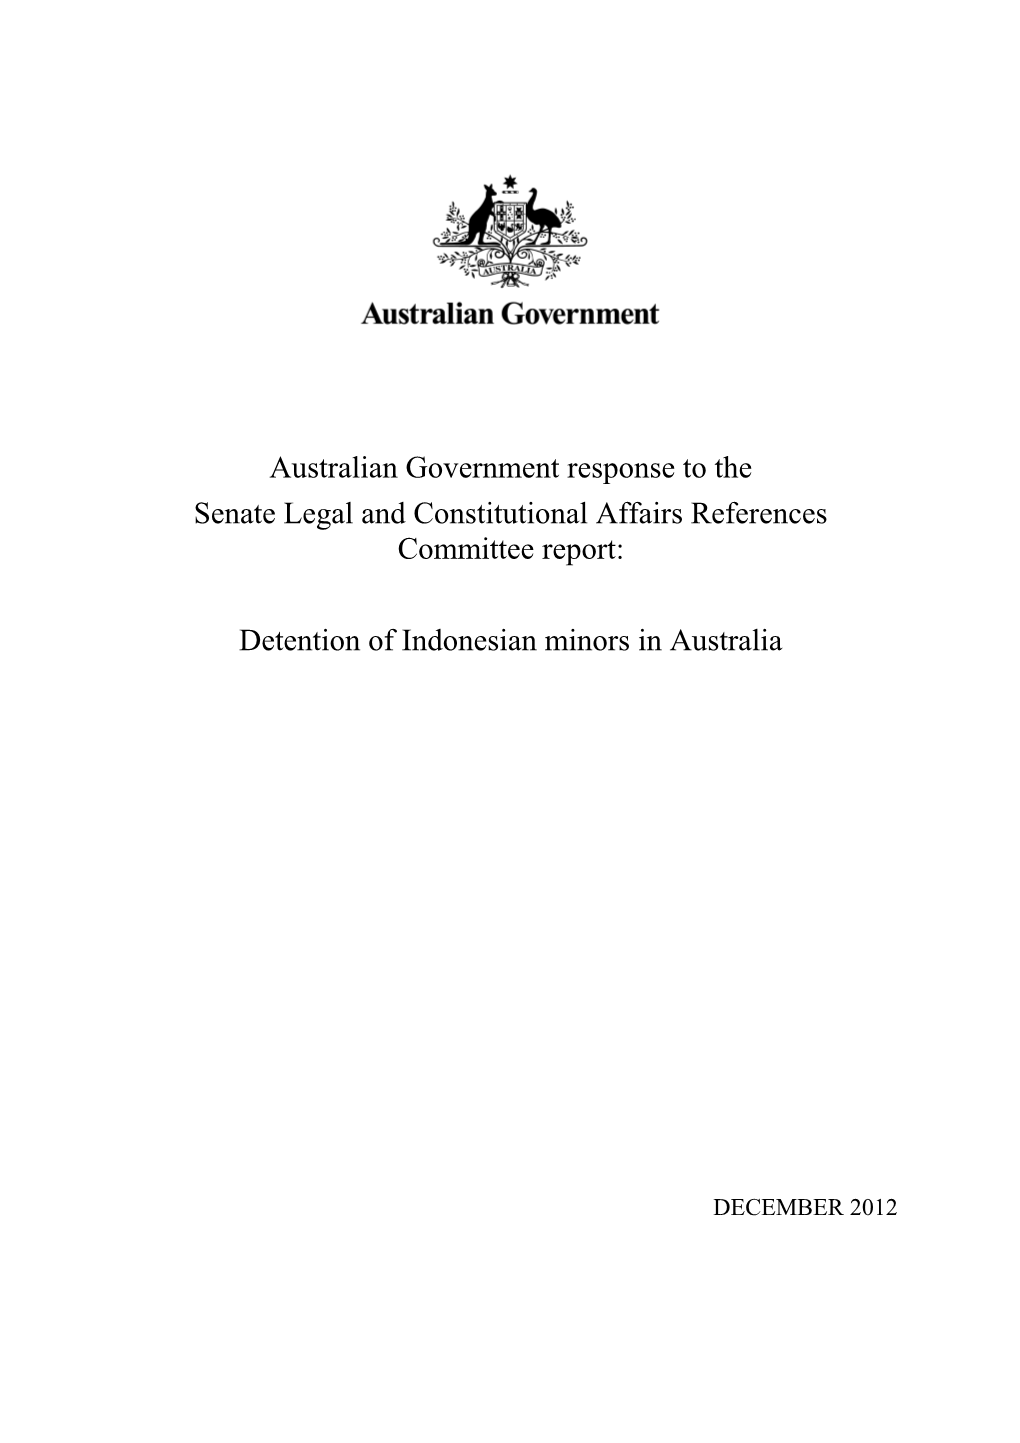 Government Response to the Senate Legal and Constitutional Affairs References Committee